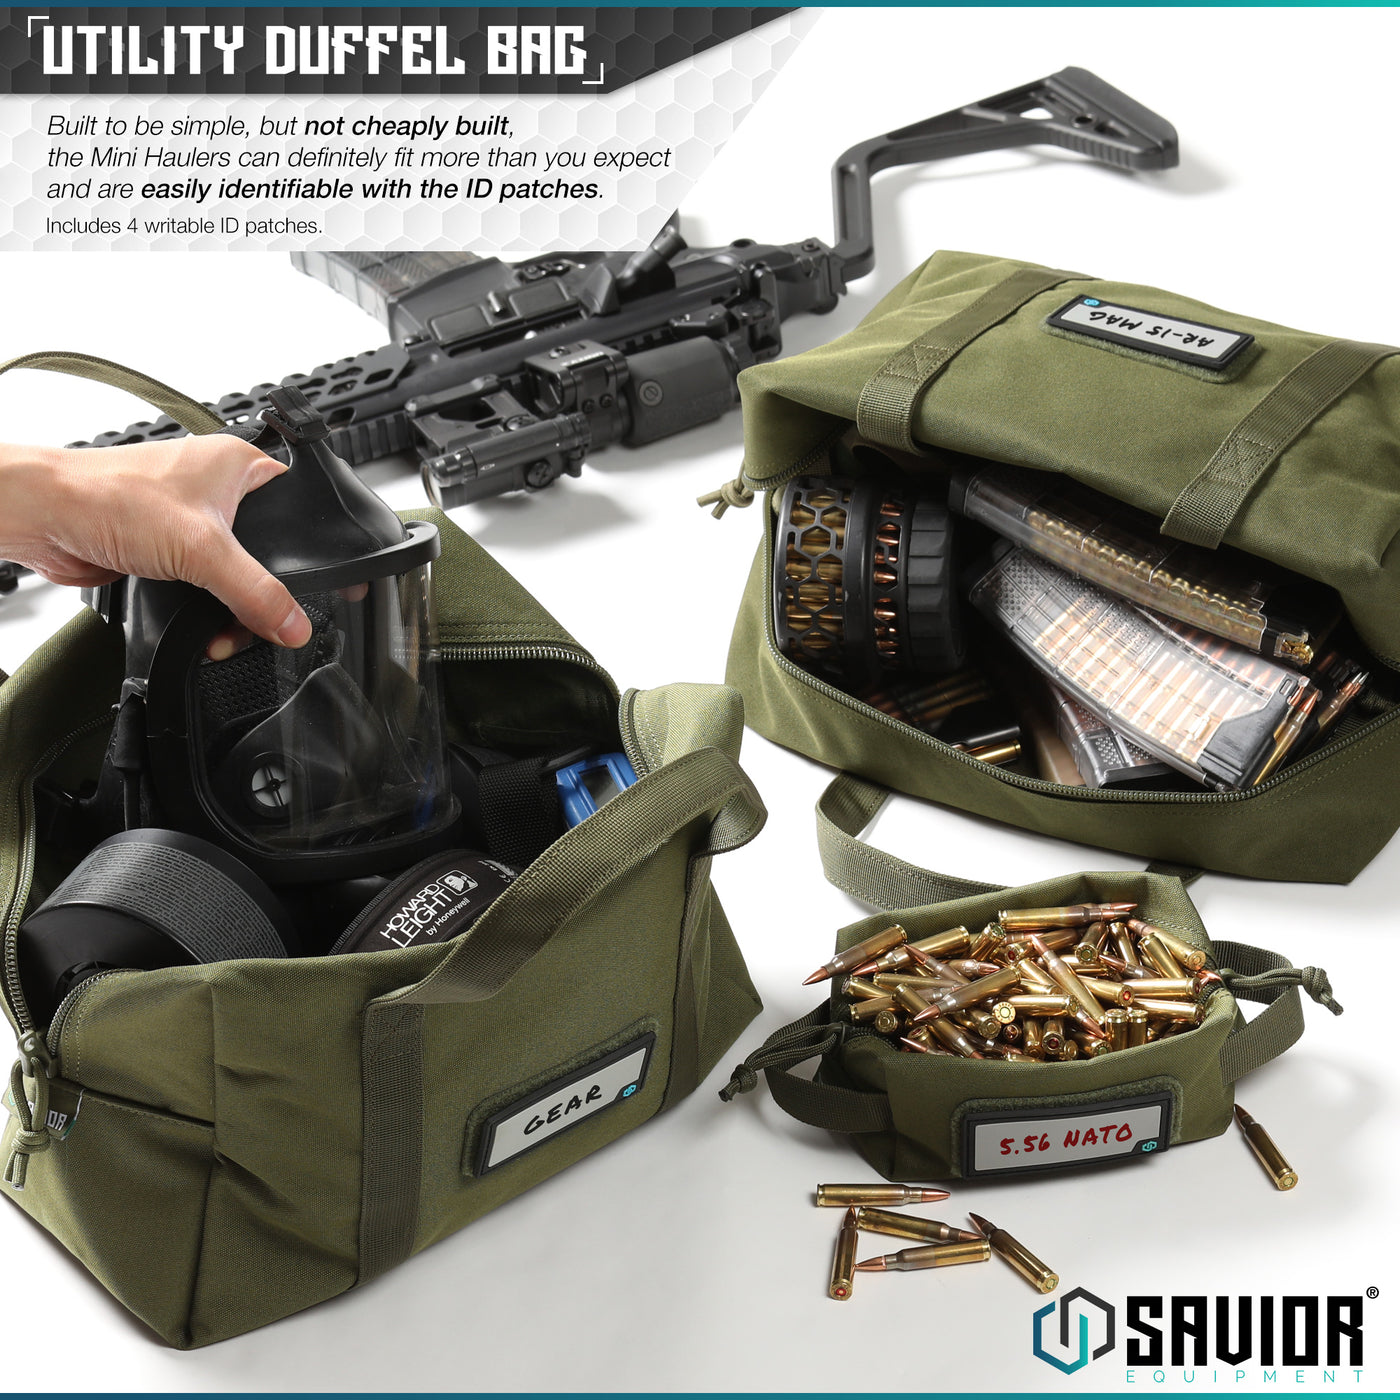 Utility Duffel Bag - Built to be simple, but not cheaply built, the Mini Haulers can definitely fit more than you expect and are easily identifiable with the ID patches. Includes 4 writable ID patches.